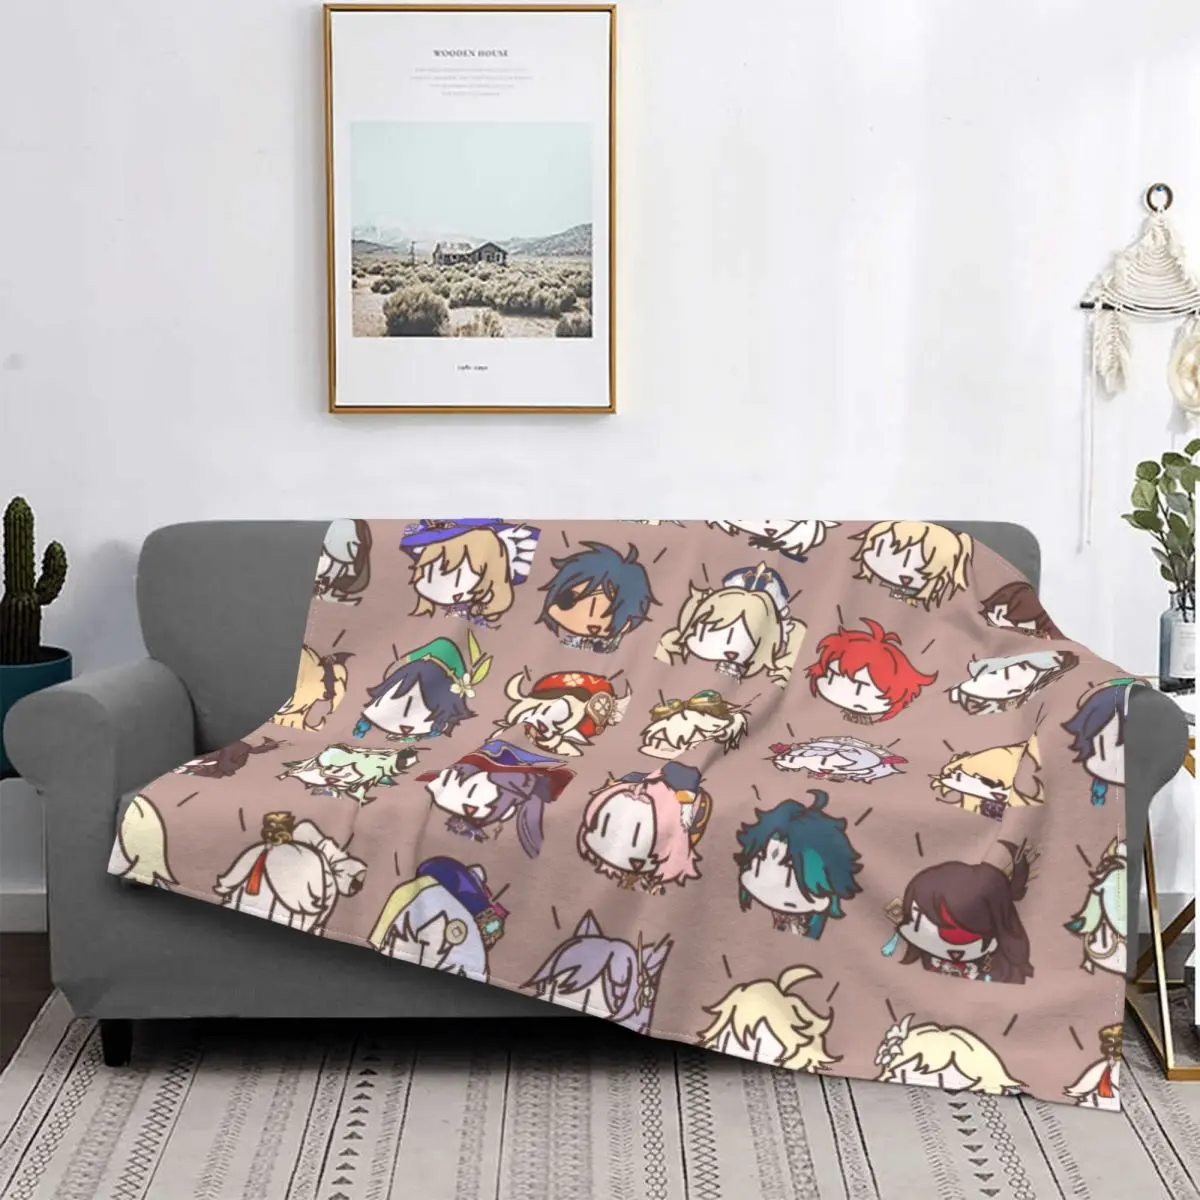 

Genshin Impact Kawaii Chibi Nerdy Characters Blankets Breathable Soft Flannel Winter Manga Throw Blanket for Couch Car Bedding